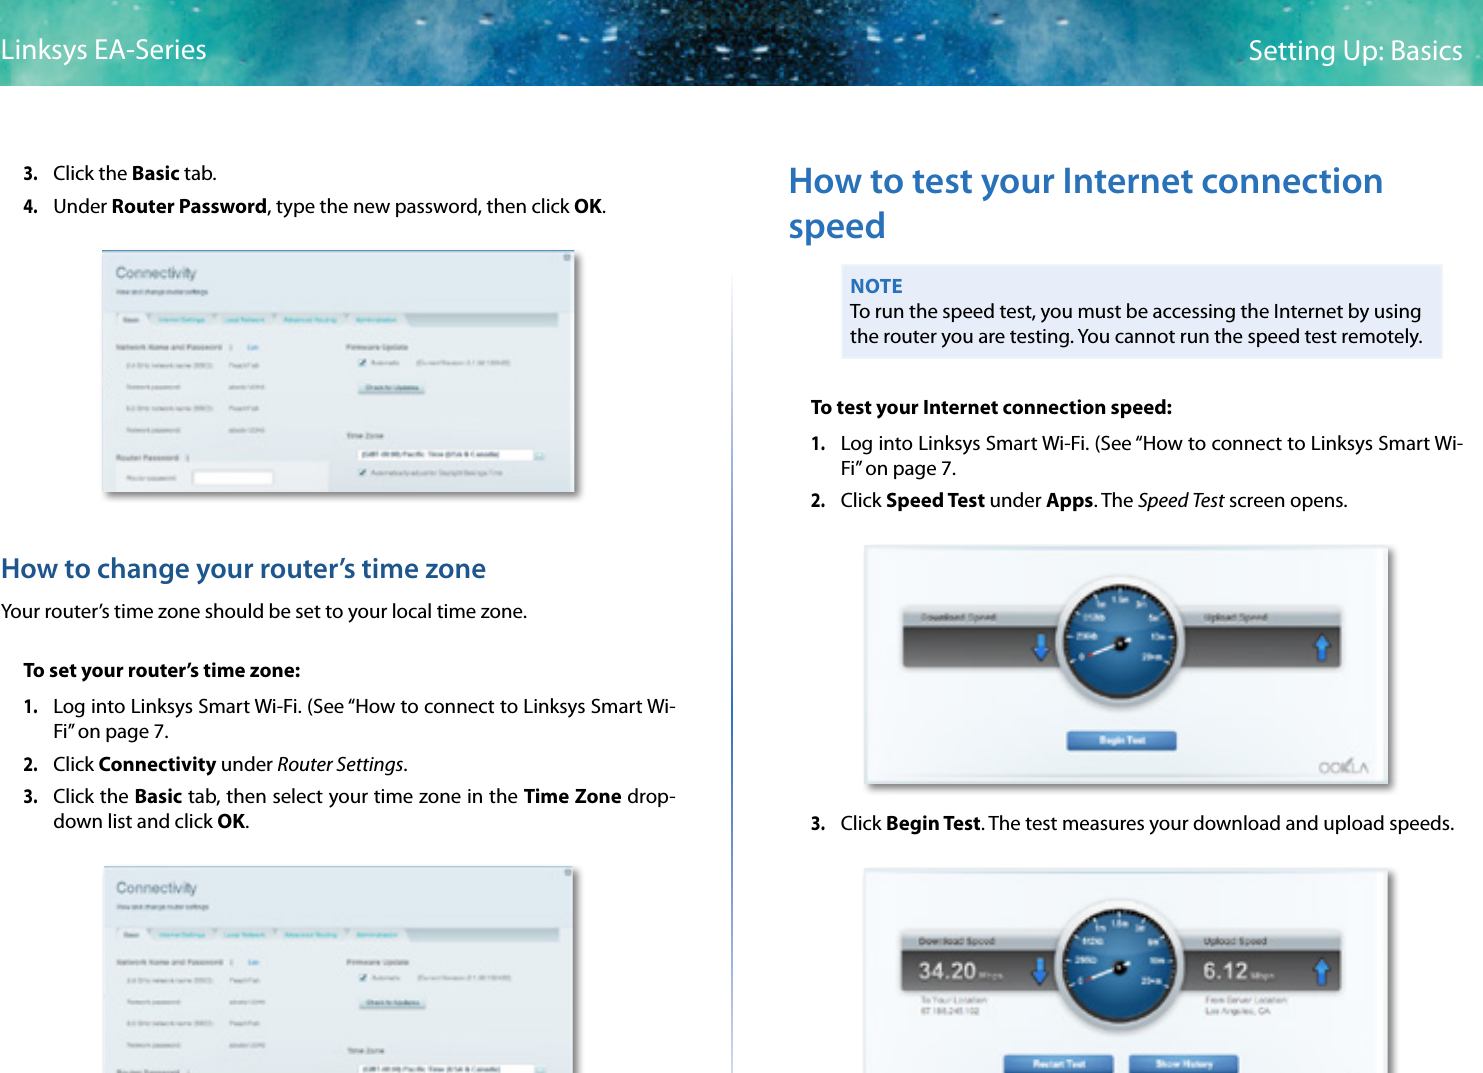 10Setting Up: BasicsLinksys EA-Series3. Click the Basic tab.4. Under Router Password, type the new password, then click OK. How to change your router’s time zoneYour router’s time zone should be set to your local time zone. To set your router’s time zone:1. Log into Linksys Smart Wi-Fi. (See “How to connect to Linksys Smart Wi-Fi” on page 7.2. Click Connectivity under Router Settings. 3. Click the Basic tab, then select your time zone in the Time Zone drop-down list and click OK. How to test your Internet connection speedNOTETo run the speed test, you must be accessing the Internet by using the router you are testing. You cannot run the speed test remotely.To test your Internet connection speed:1. Log into Linksys Smart Wi-Fi. (See “How to connect to Linksys Smart Wi-Fi” on page 7.2. Click Speed Test under Apps. The Speed Test screen opens.3. Click Begin Test. The test measures your download and upload speeds.